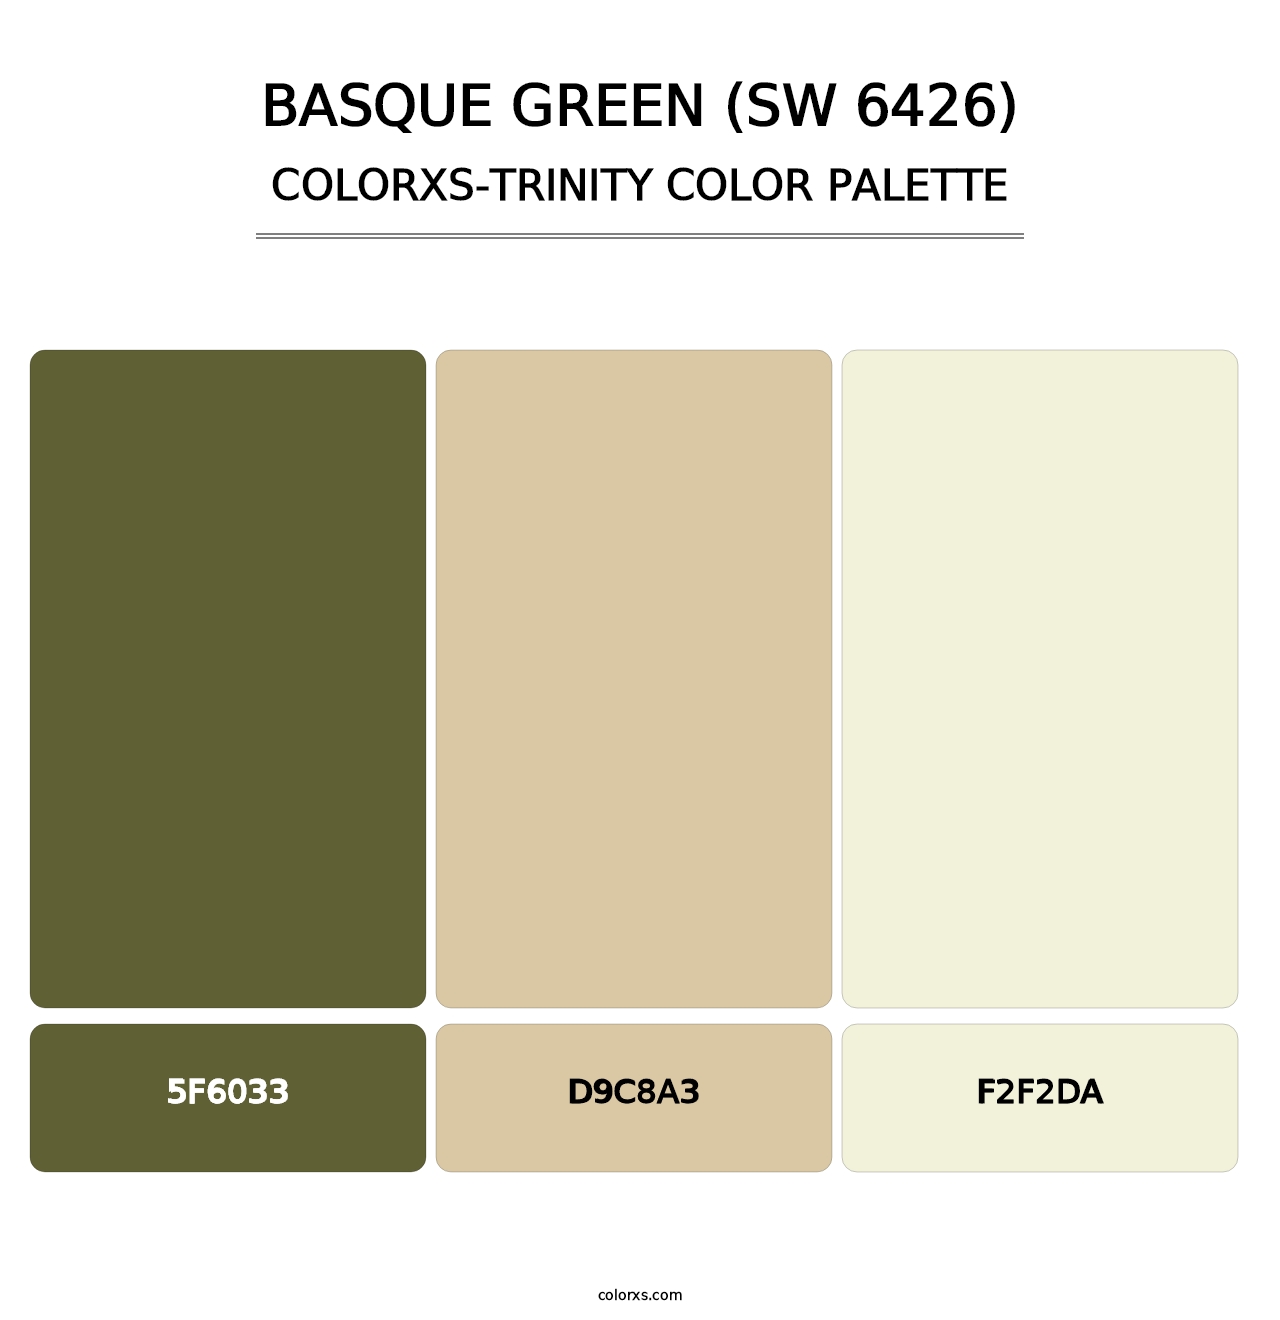 Basque Green (SW 6426) - Colorxs Trinity Palette